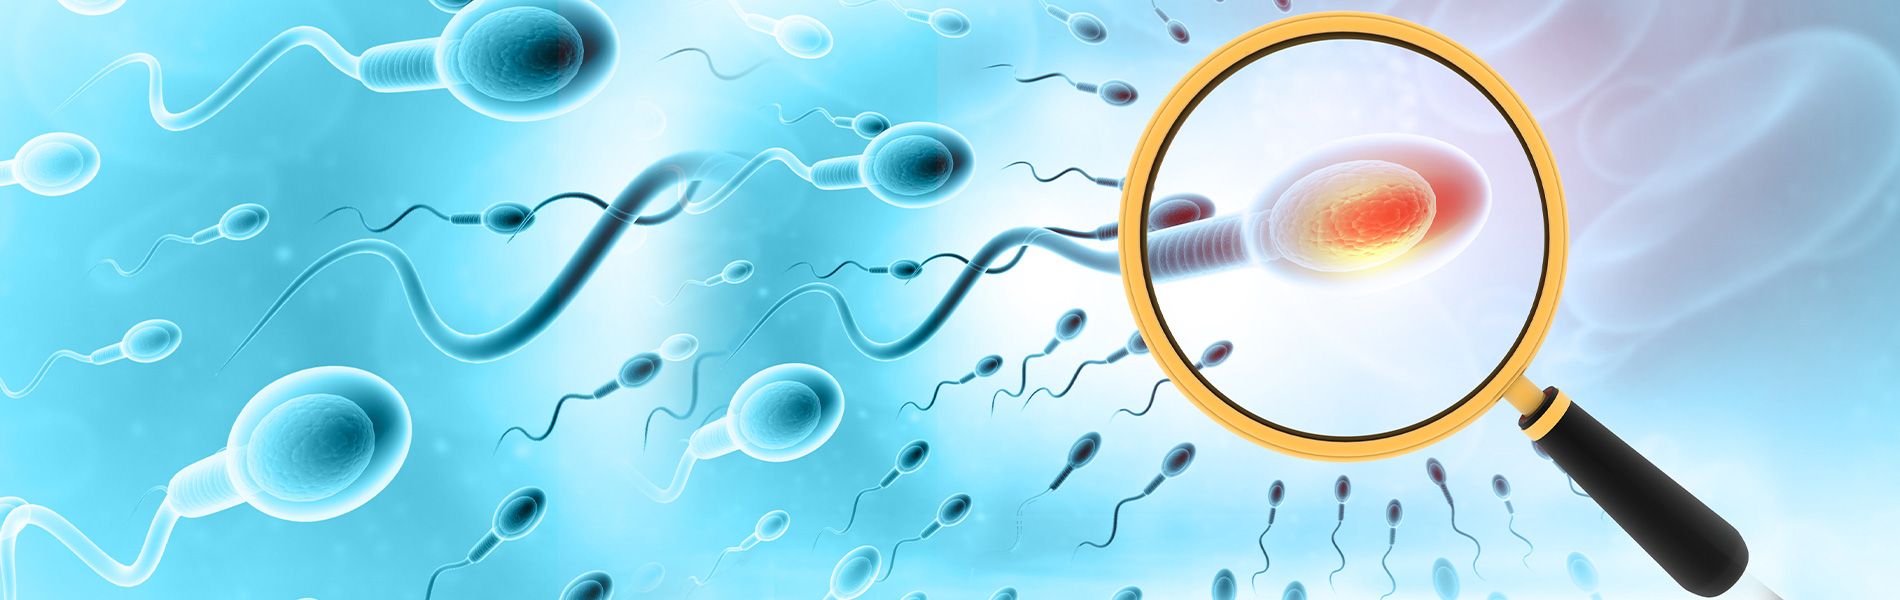 1900x600-blog-images-know-your-sperm-health-16838689958571573403657-1718956340692-17189563418161765249690.jpg